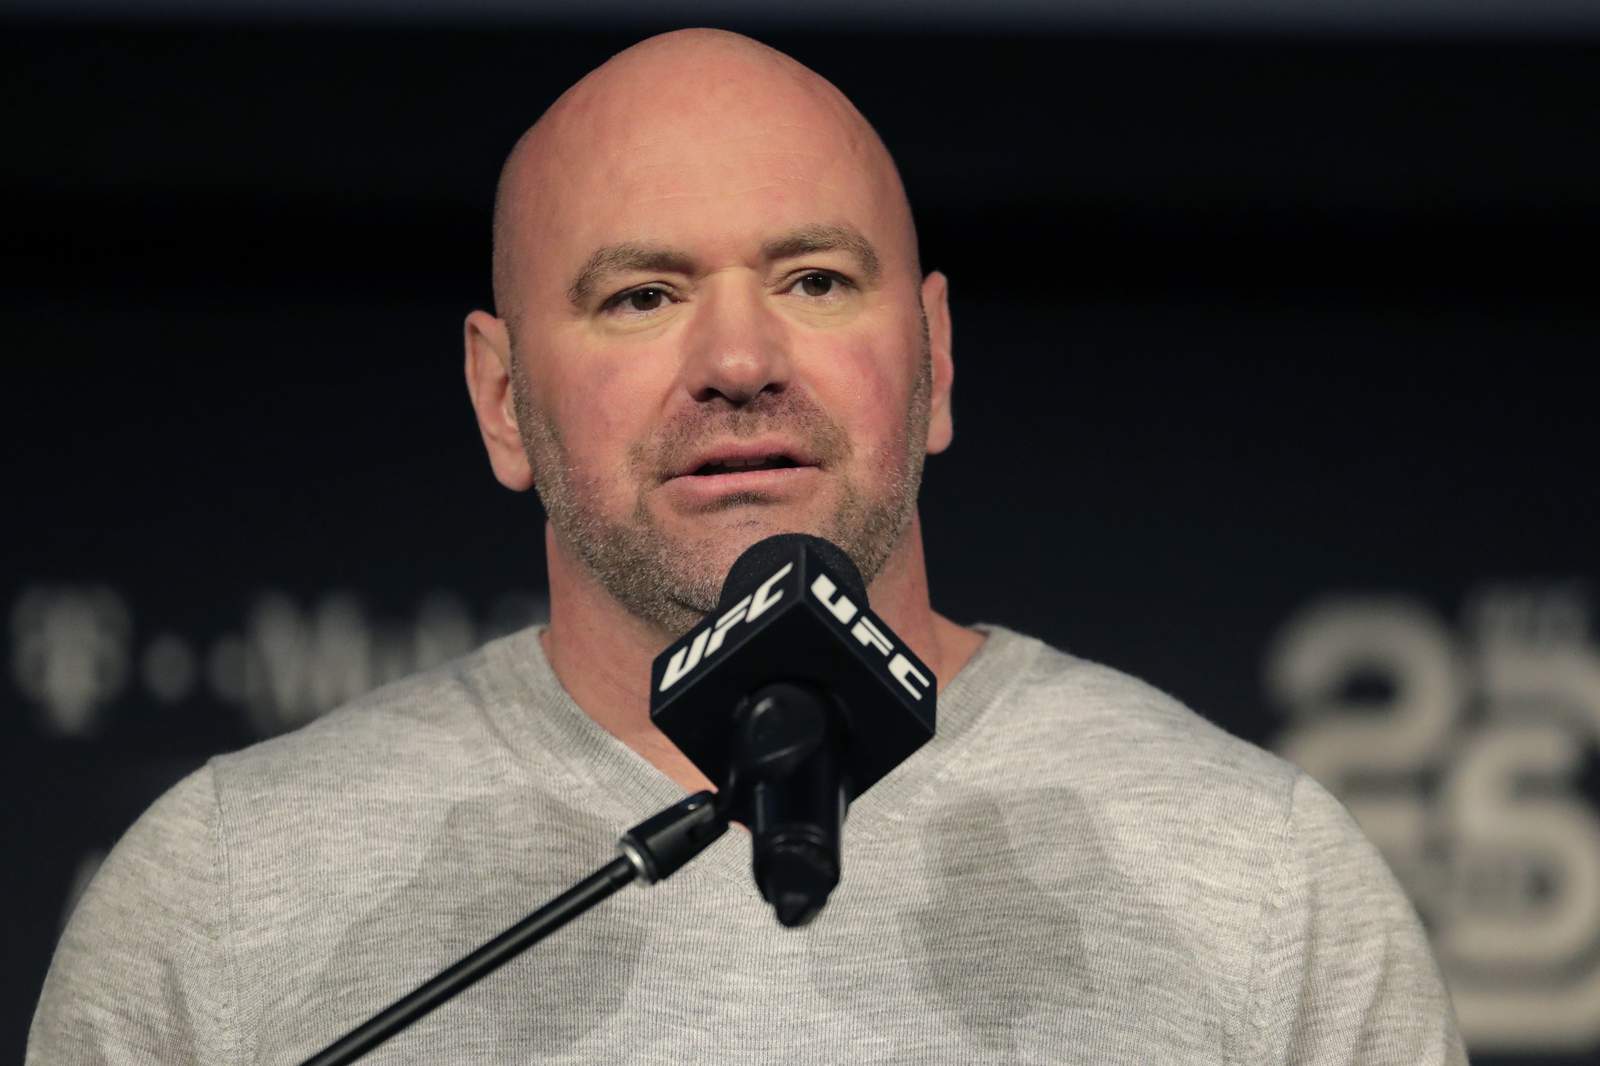 They’re back: Blockbuster UFC card coming to Jacksonville next month, with fans